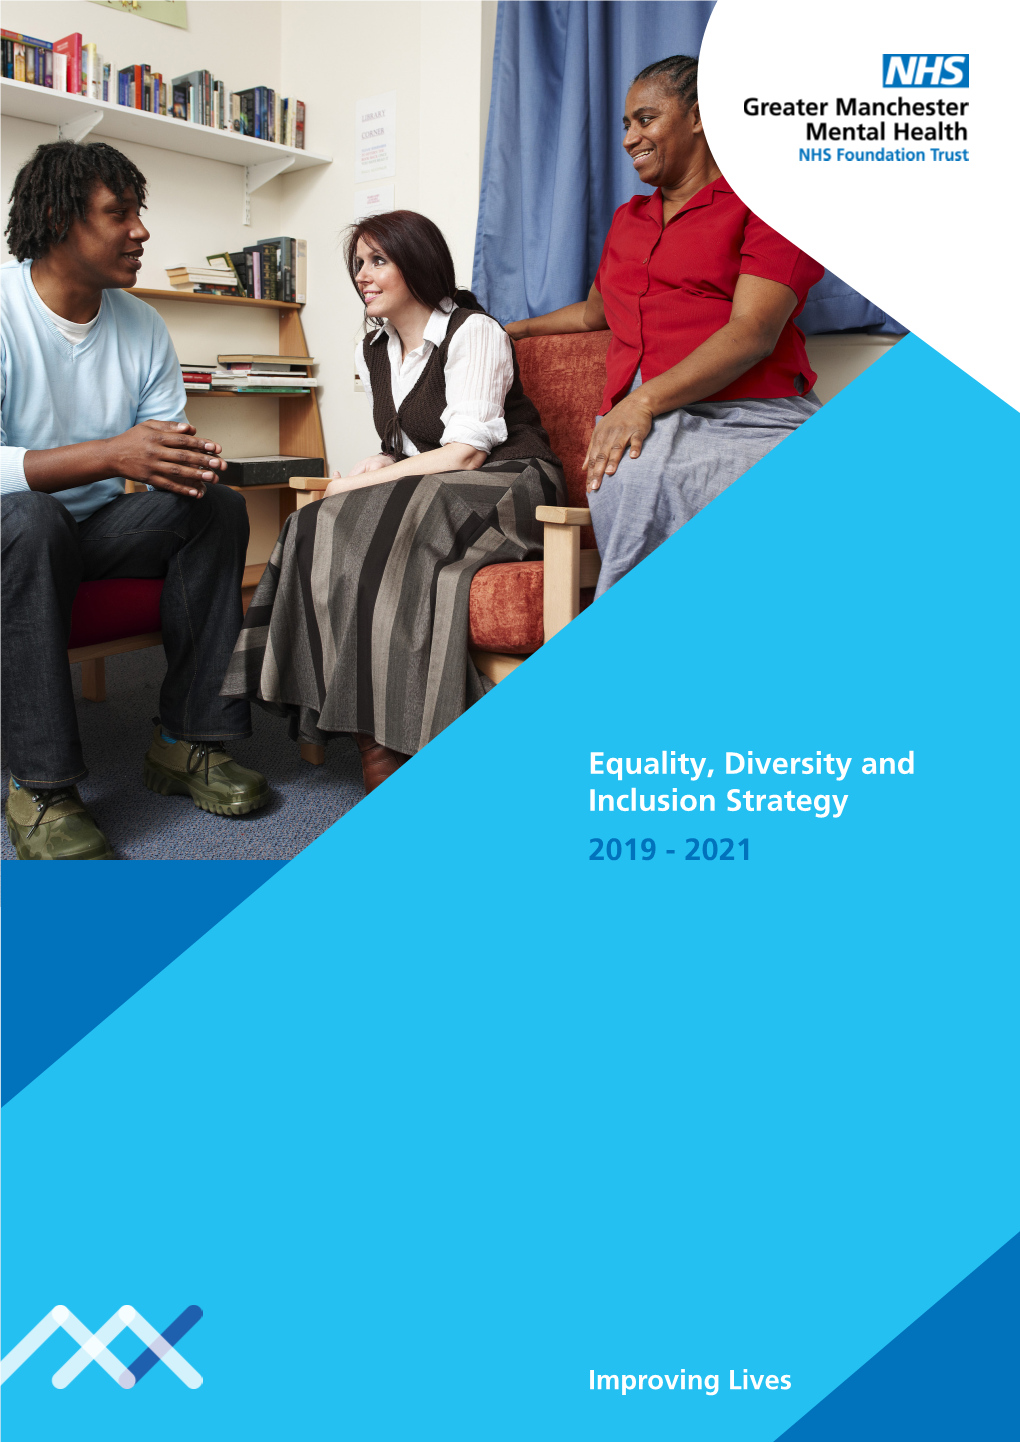 Equality, Diversity and Inclusion Strategy 2019 - 2021